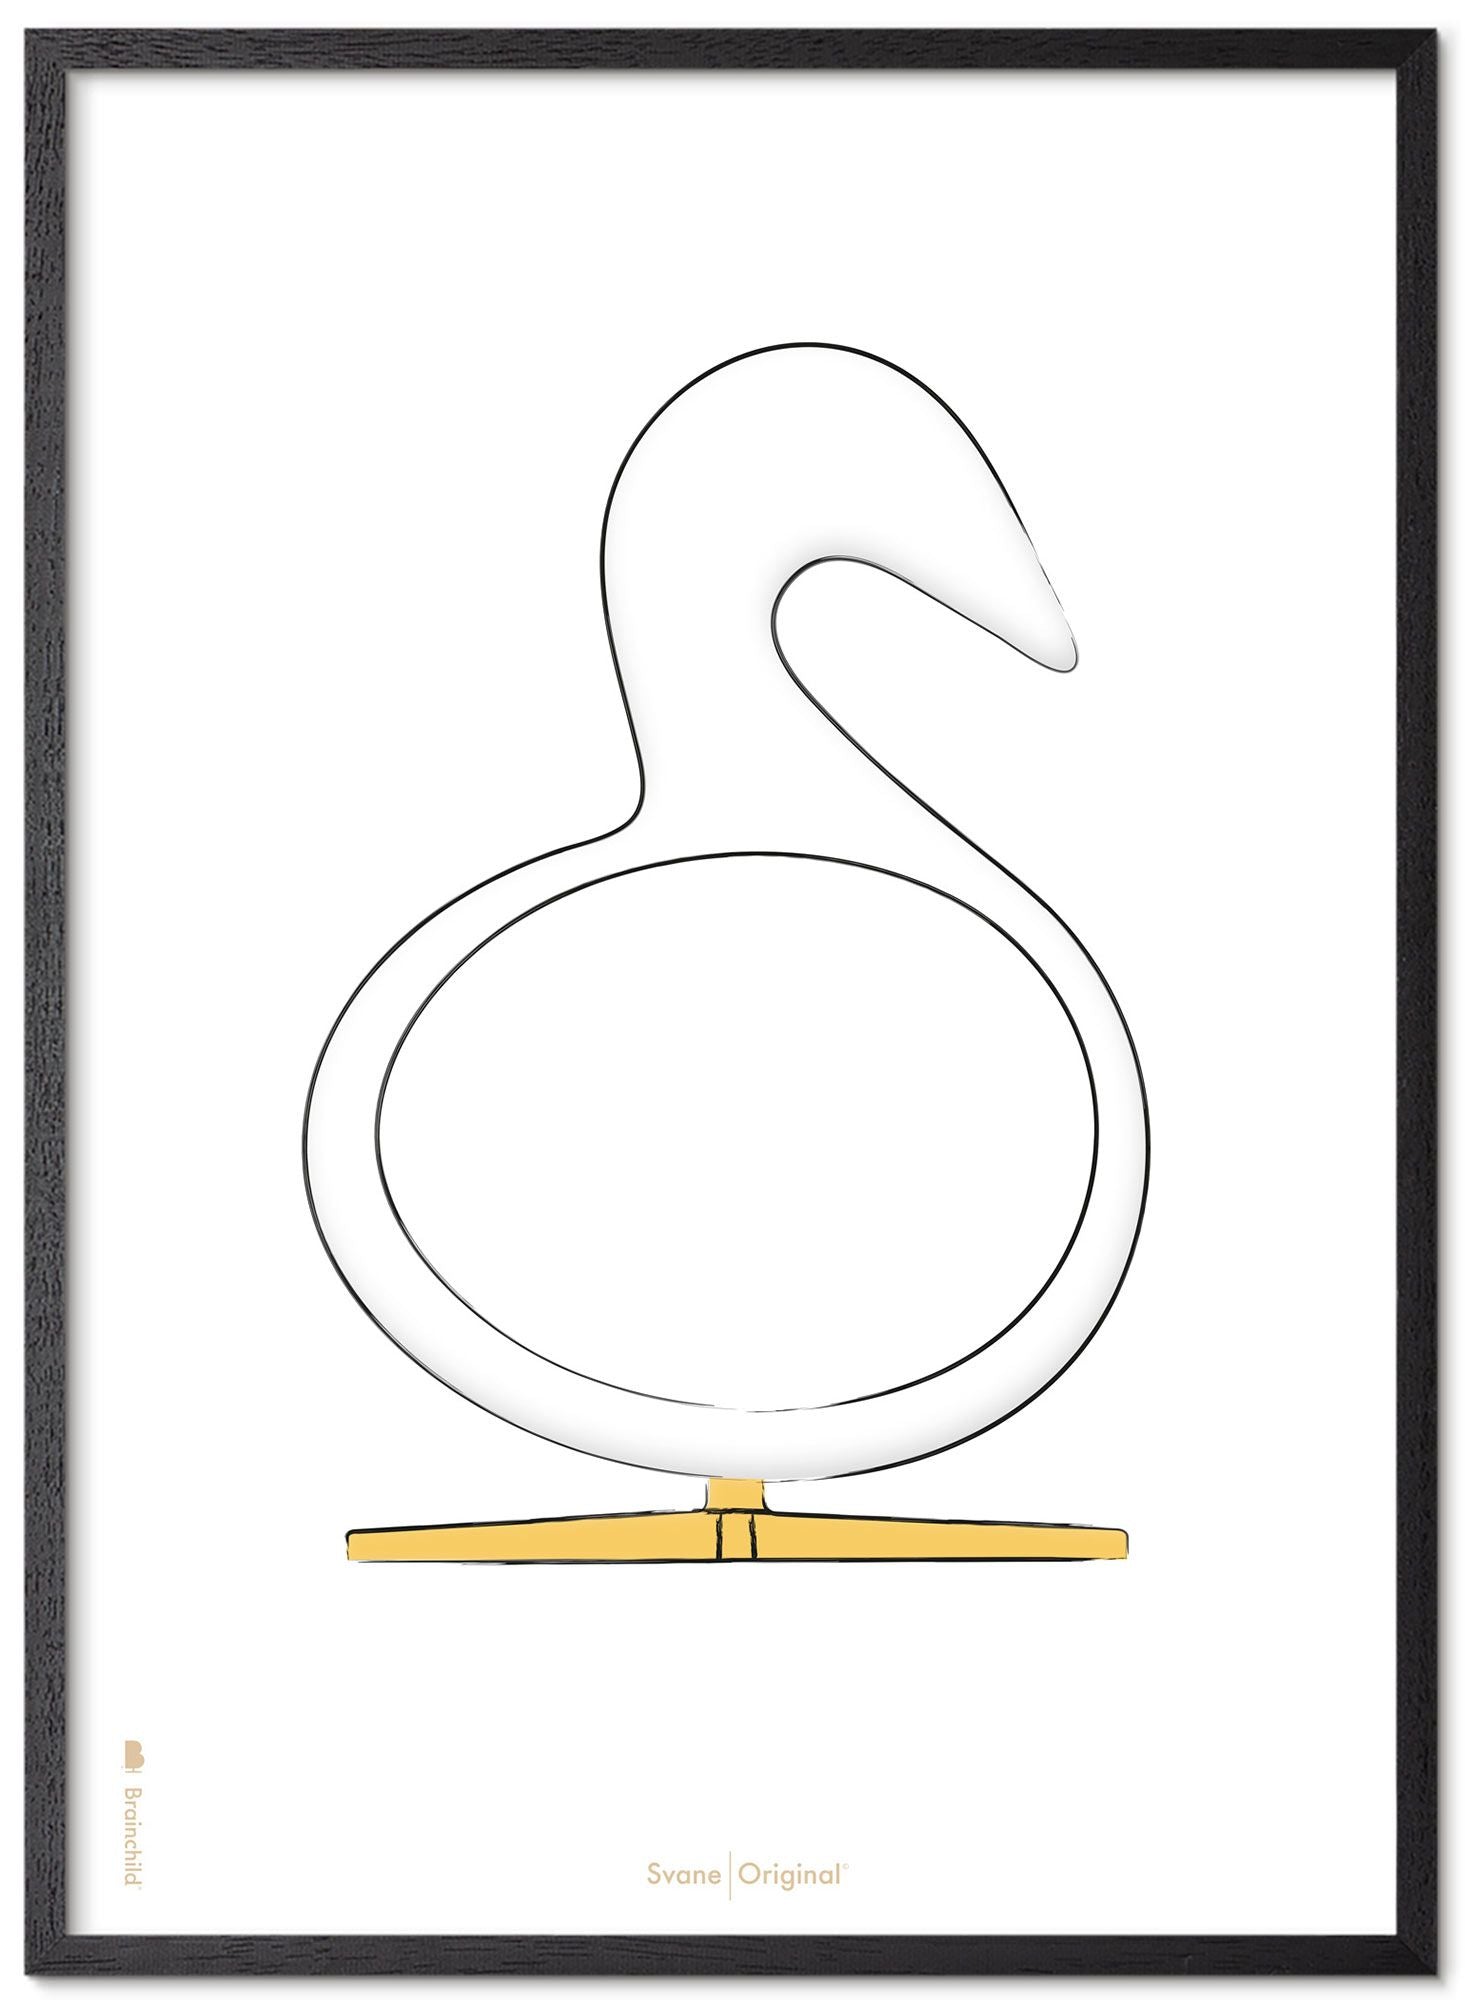 Brainchild Swan Design Sketch Poster Frame Made Of Black Lacquered Wood 30x40 Cm, White Background